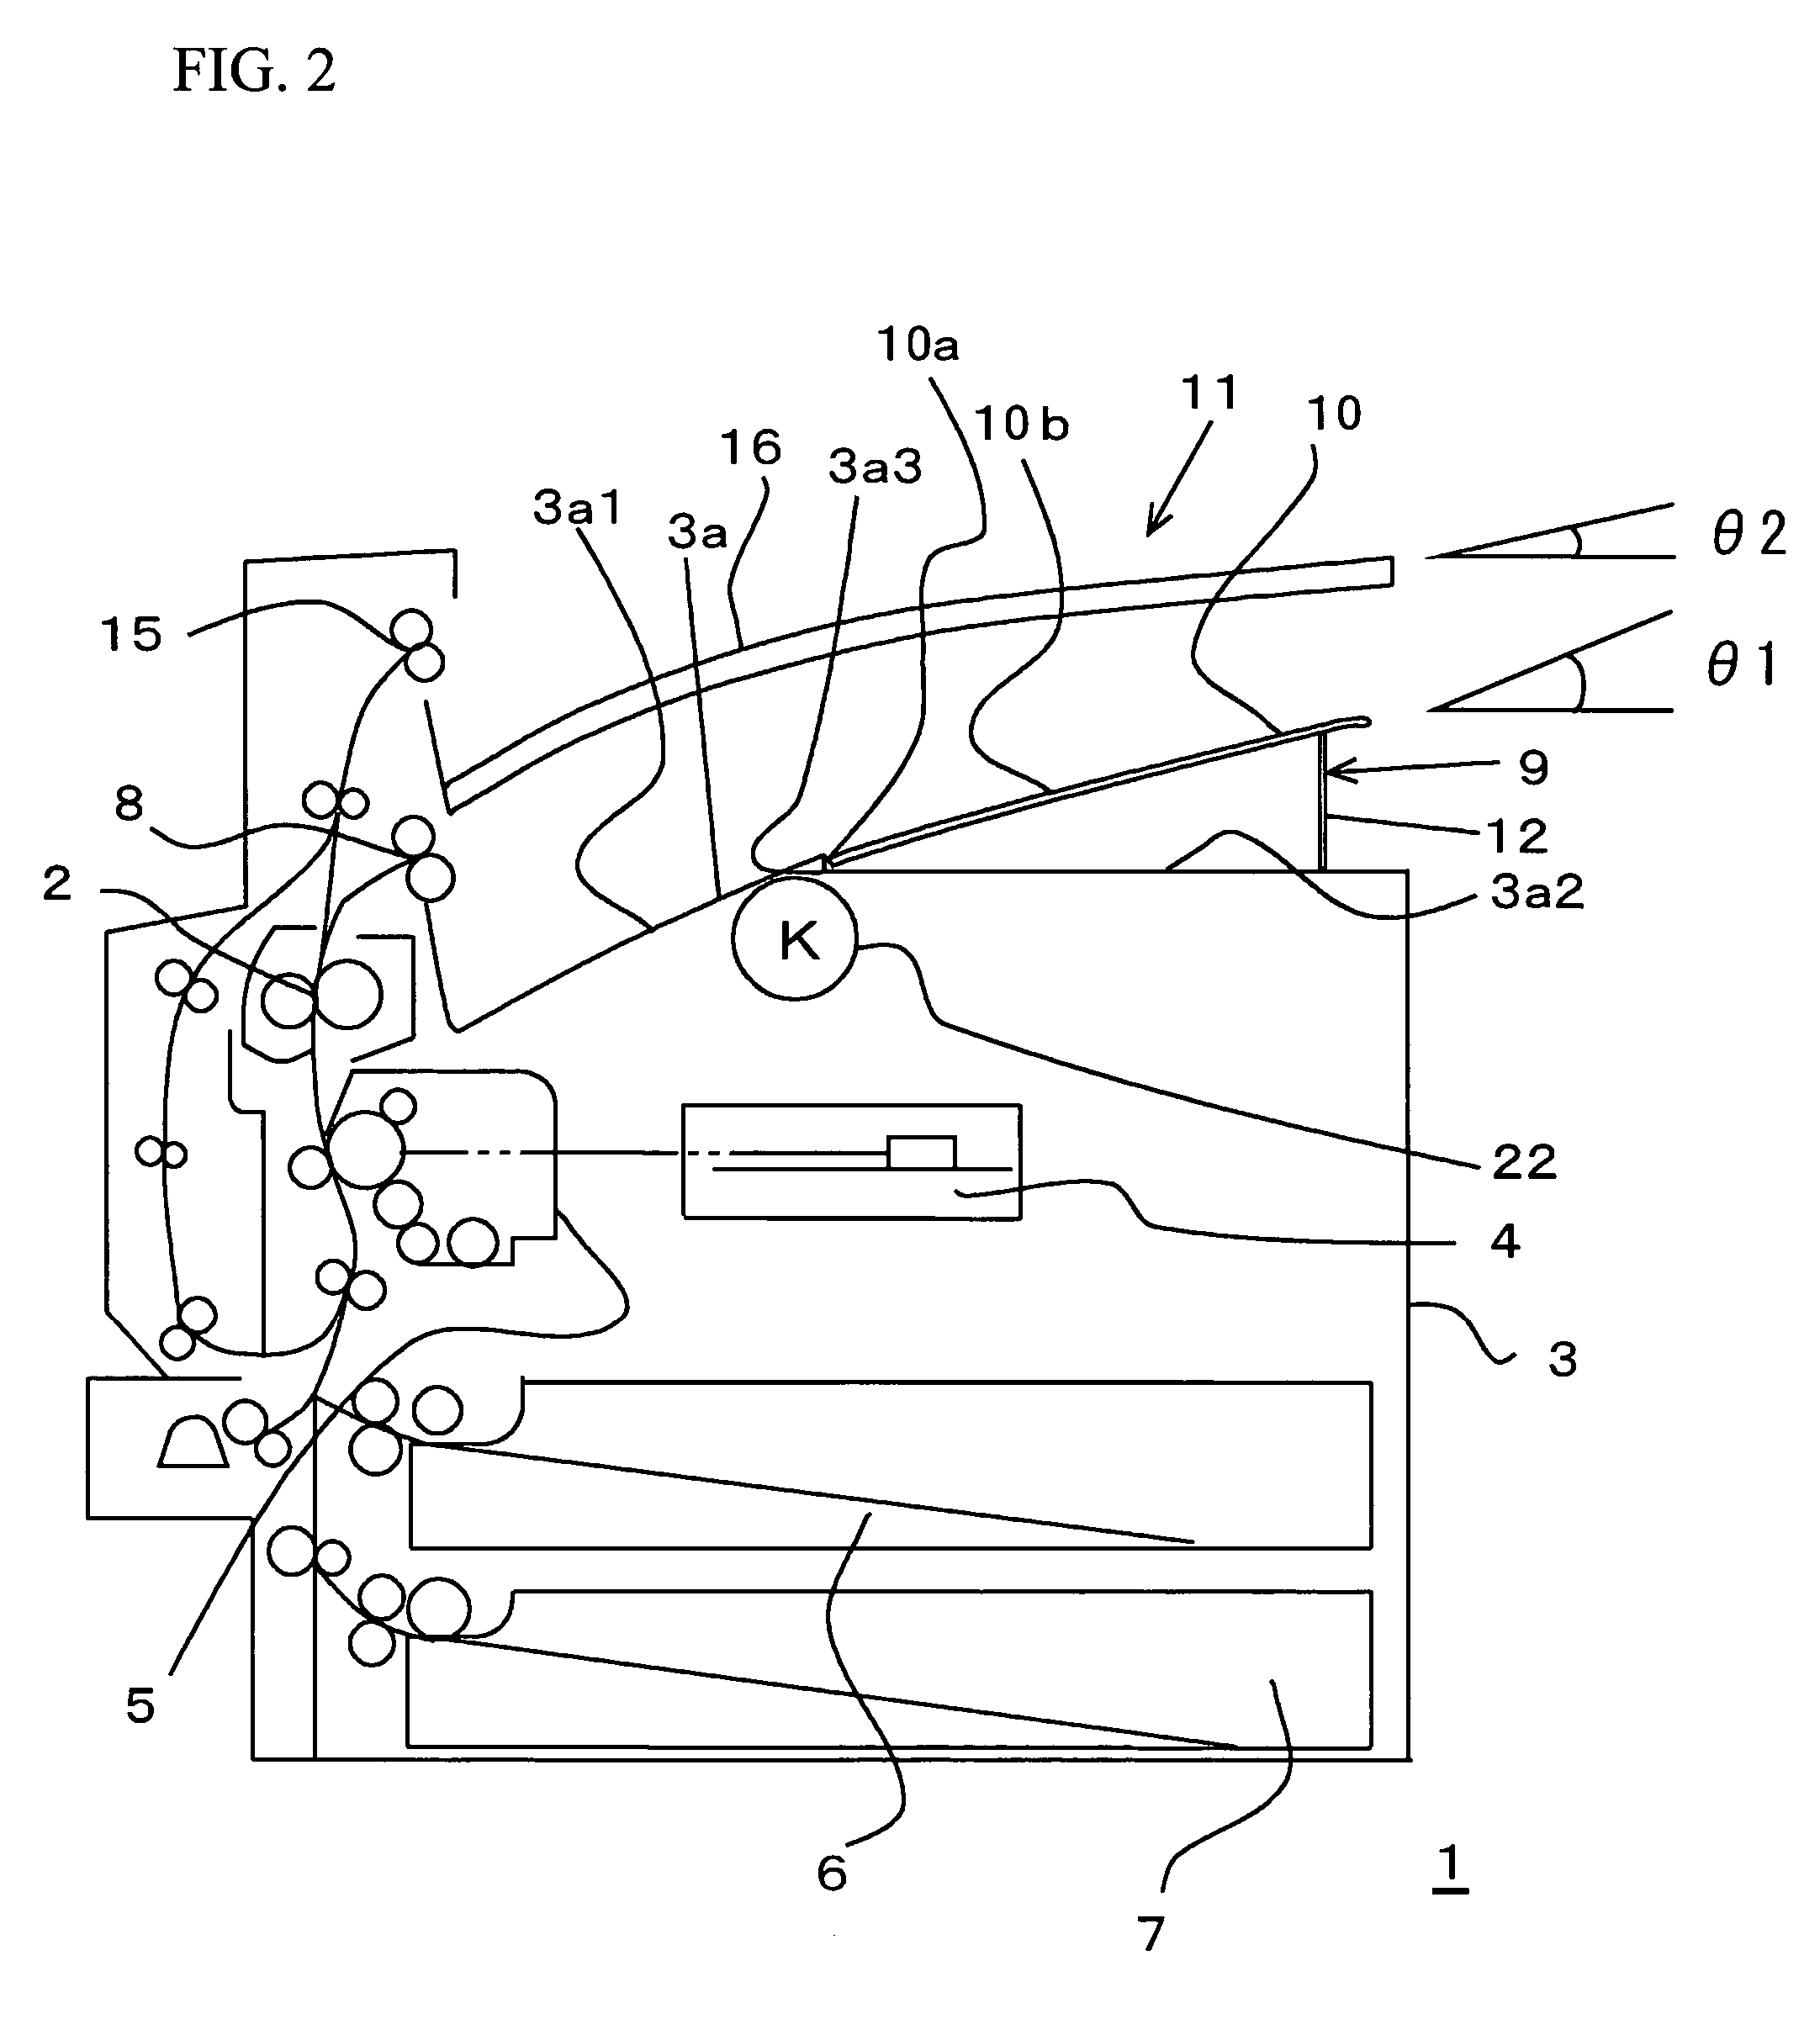 Image-forming apparatus and multiple sheet curl correcting sheet-receiving units